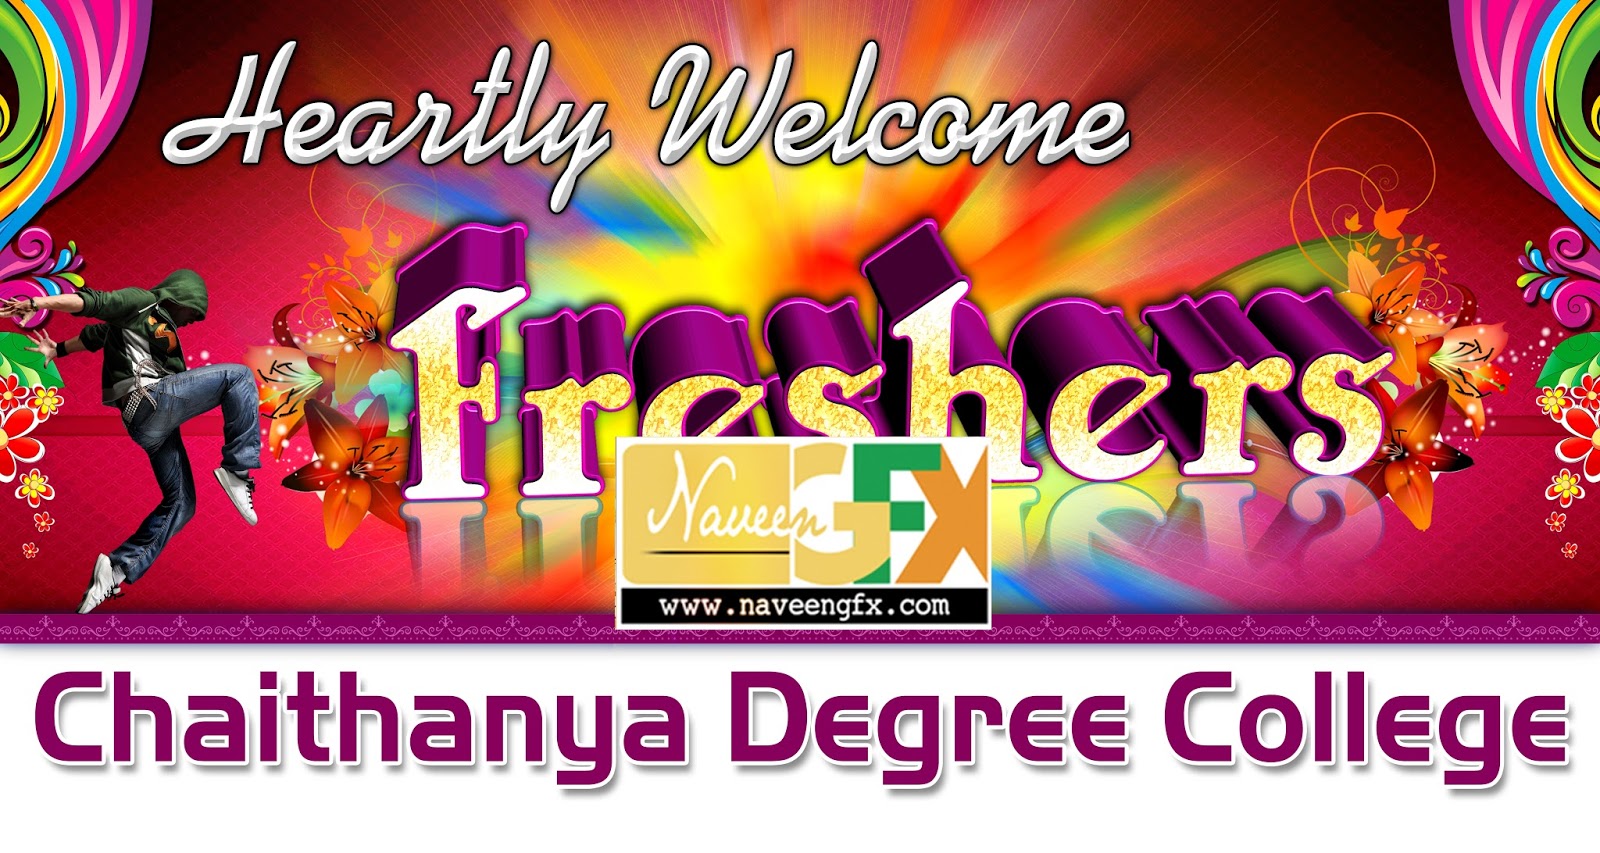 freshers day flex banners psd template free downloads | naveengfx